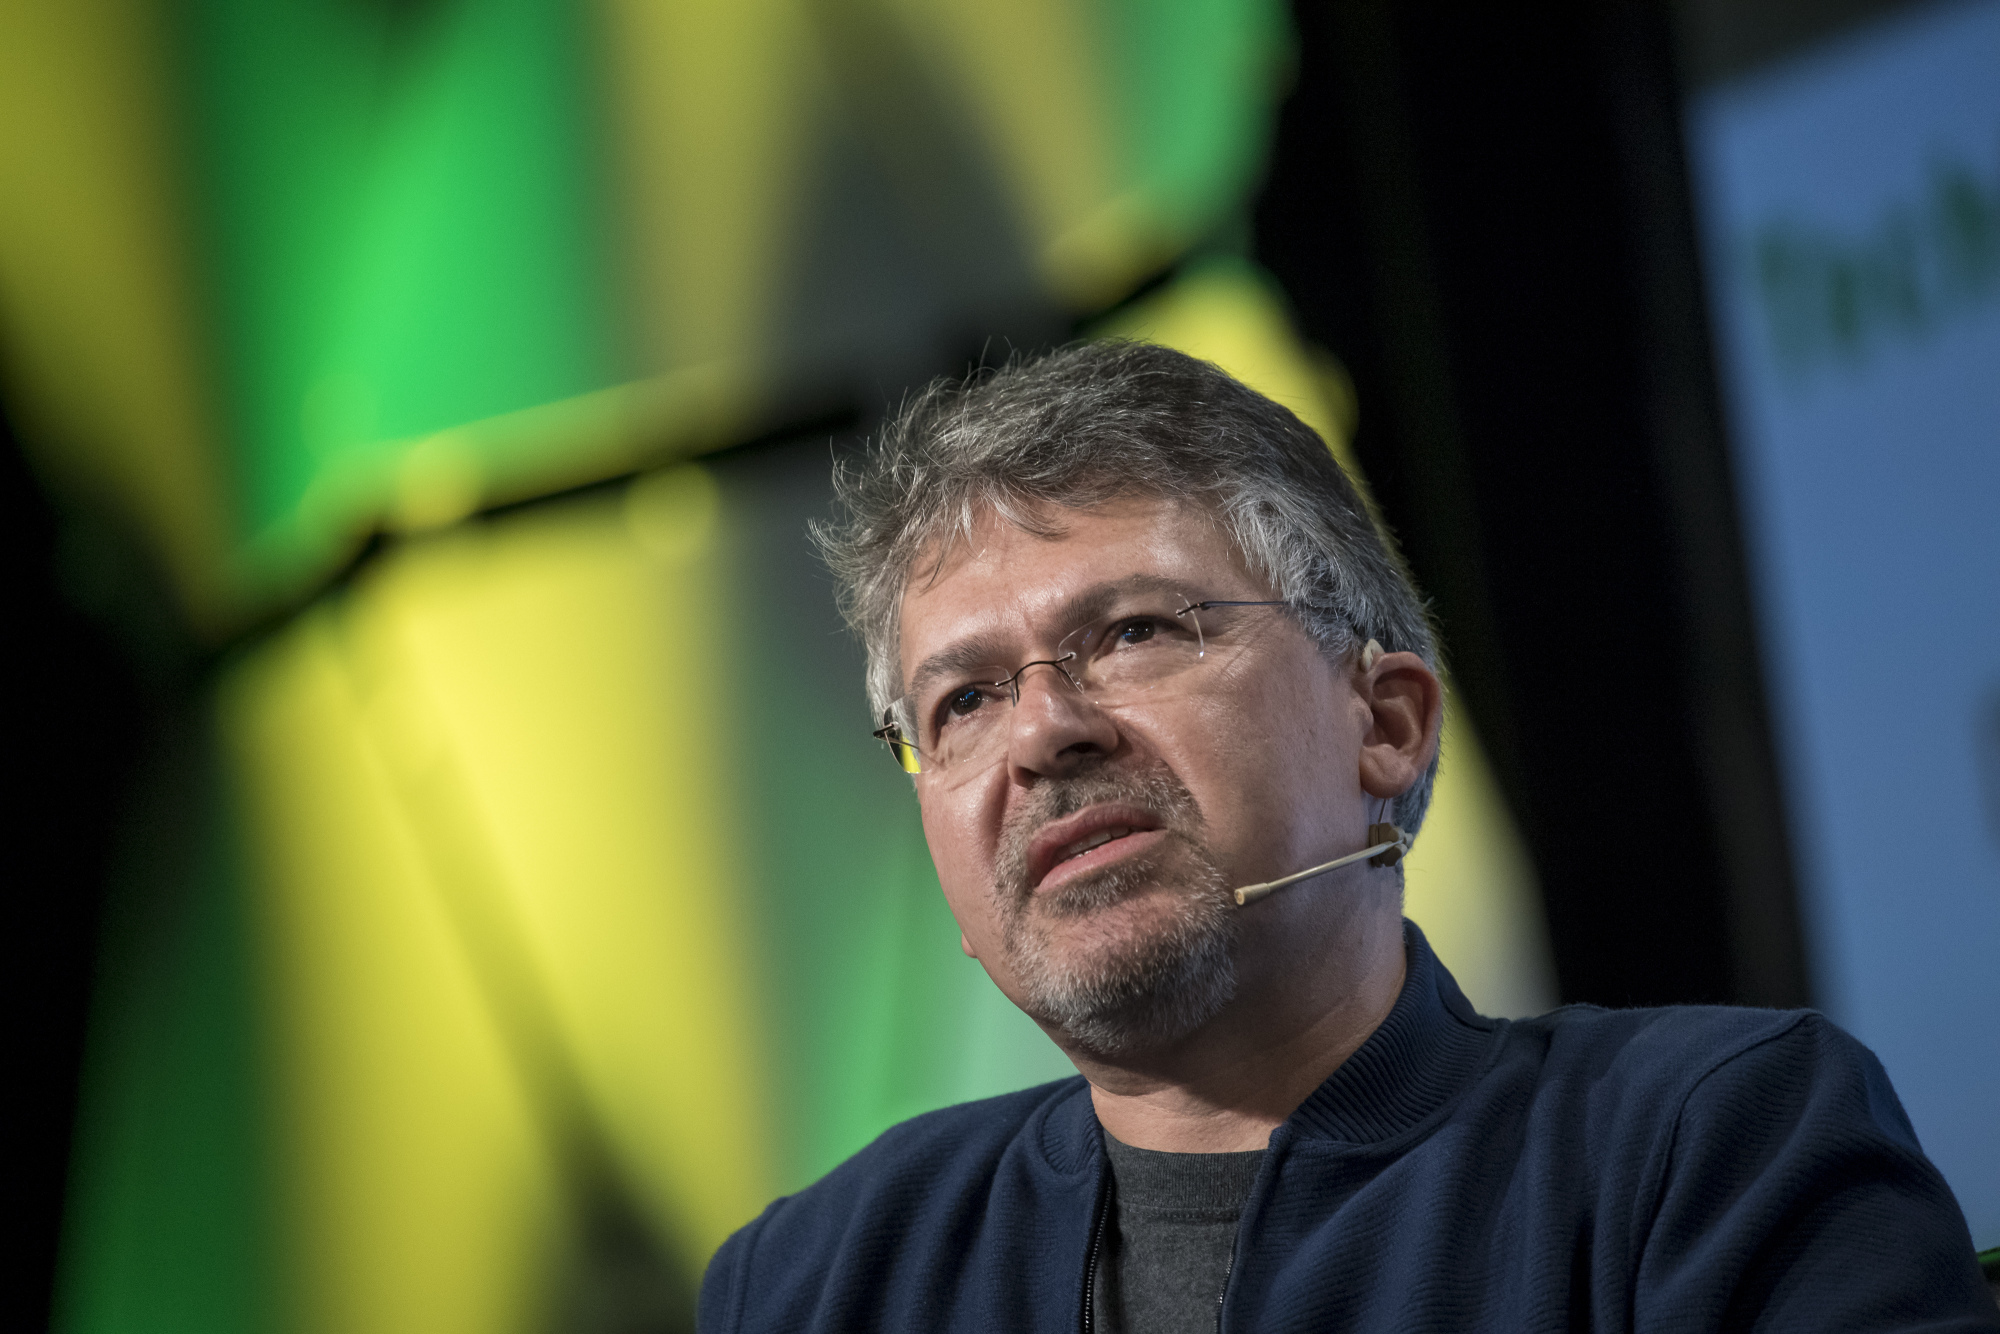 John Giannandrea, senior vice president for Search at Google Inc., speaks during the TechCrunch Disrupt 2017 in San Francisco, California, U.S., on Tuesday, Sept. 19, 2017. TechCrunch Disrupt, the world's leading authority in debuting revolutionary startups, gathers the brightest entrepreneurs, investors, hackers, and tech fans for on-stage interviews. Photographer: David Paul Morris/Bloomberg